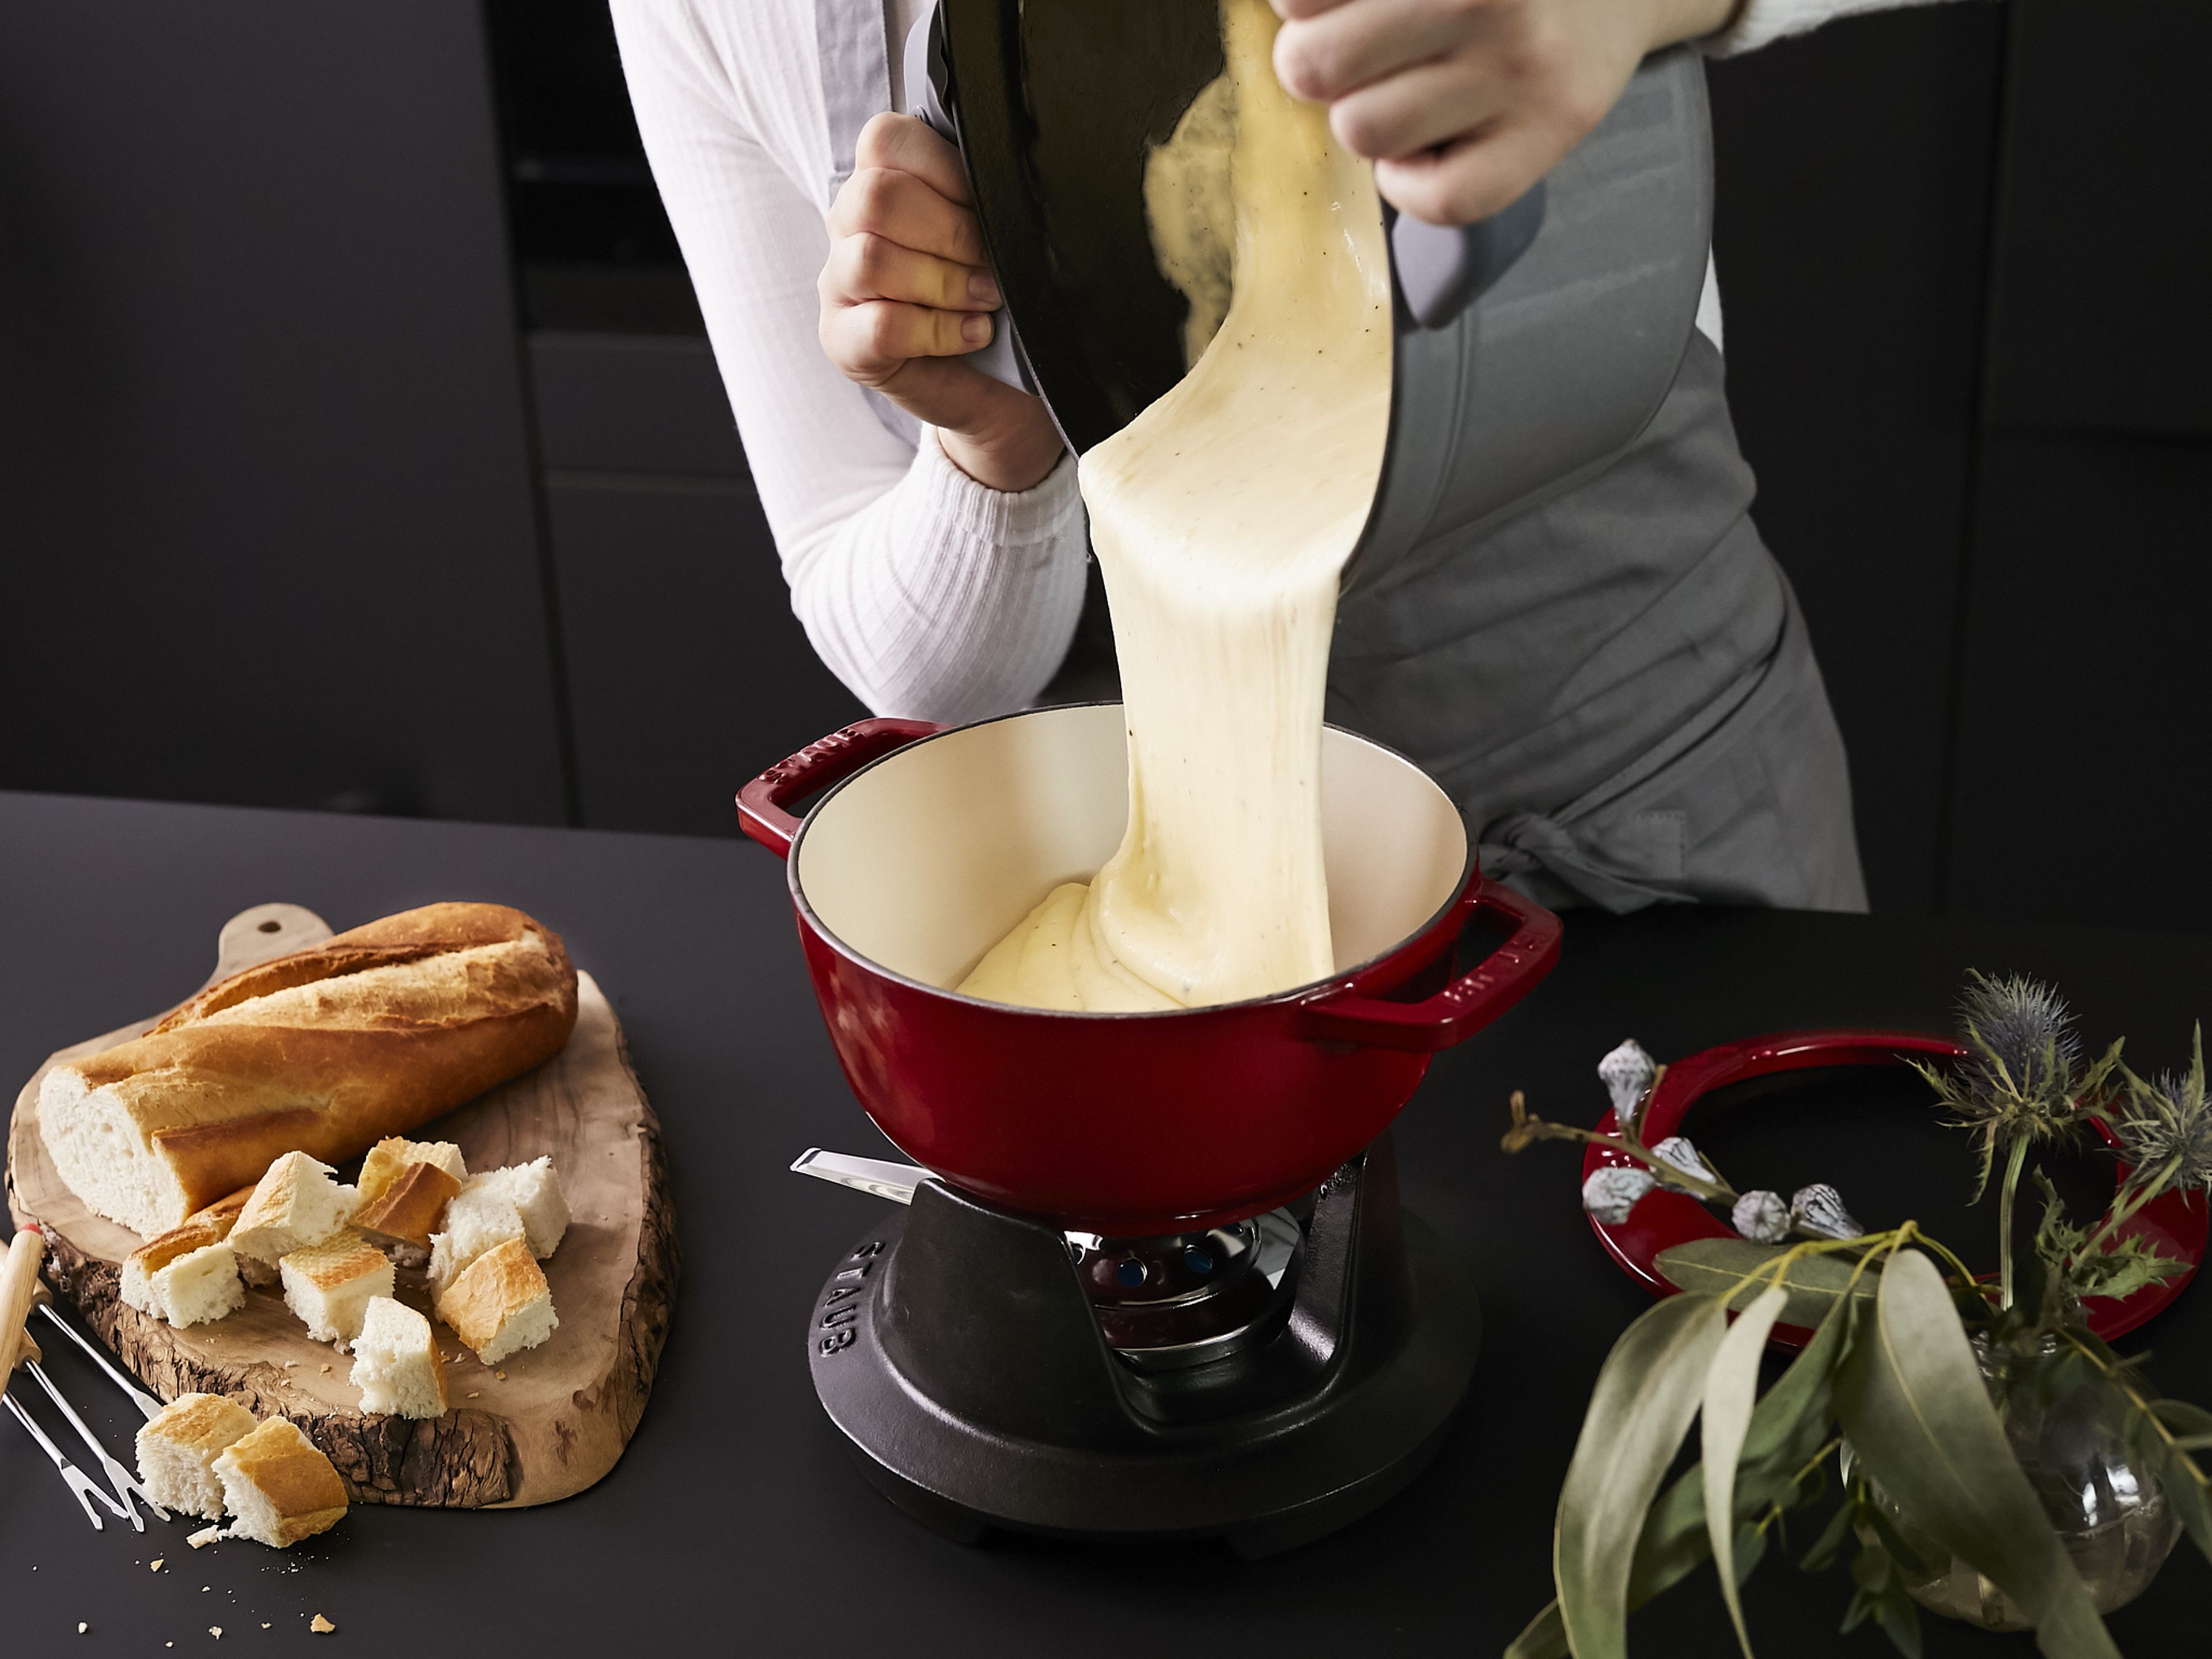 Serve cheese fondue with a baguette, pickles or other sides. Enjoy!